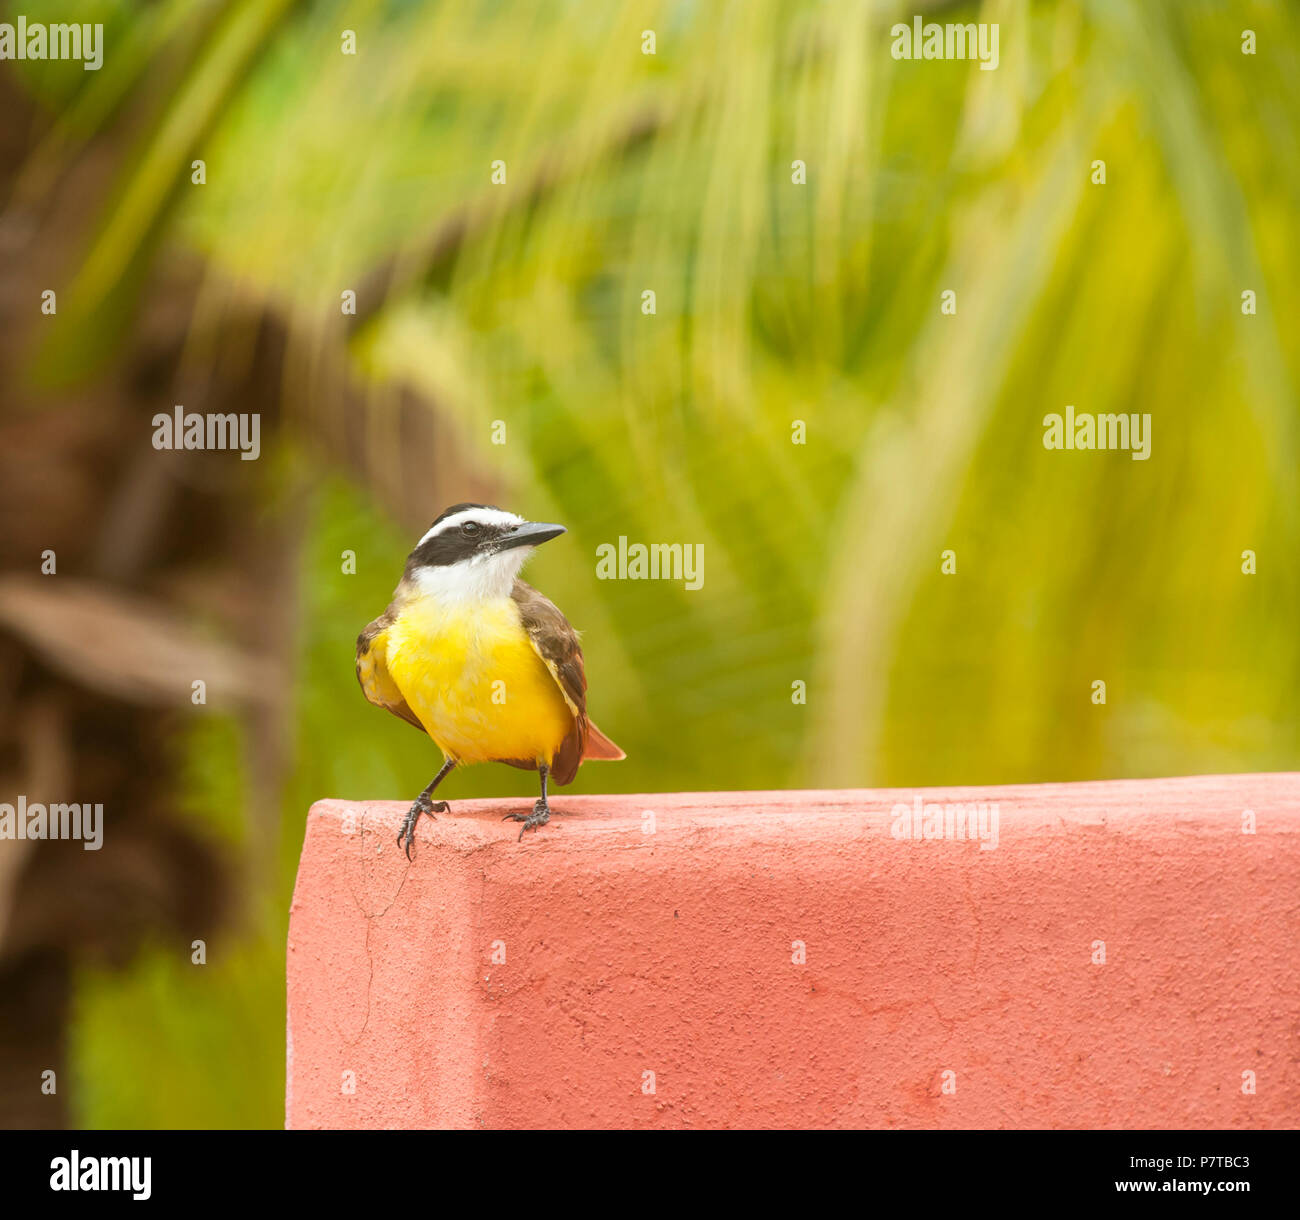 White-ringed flycatcher sits on a red wall in the tropical rain forest Stock Photo